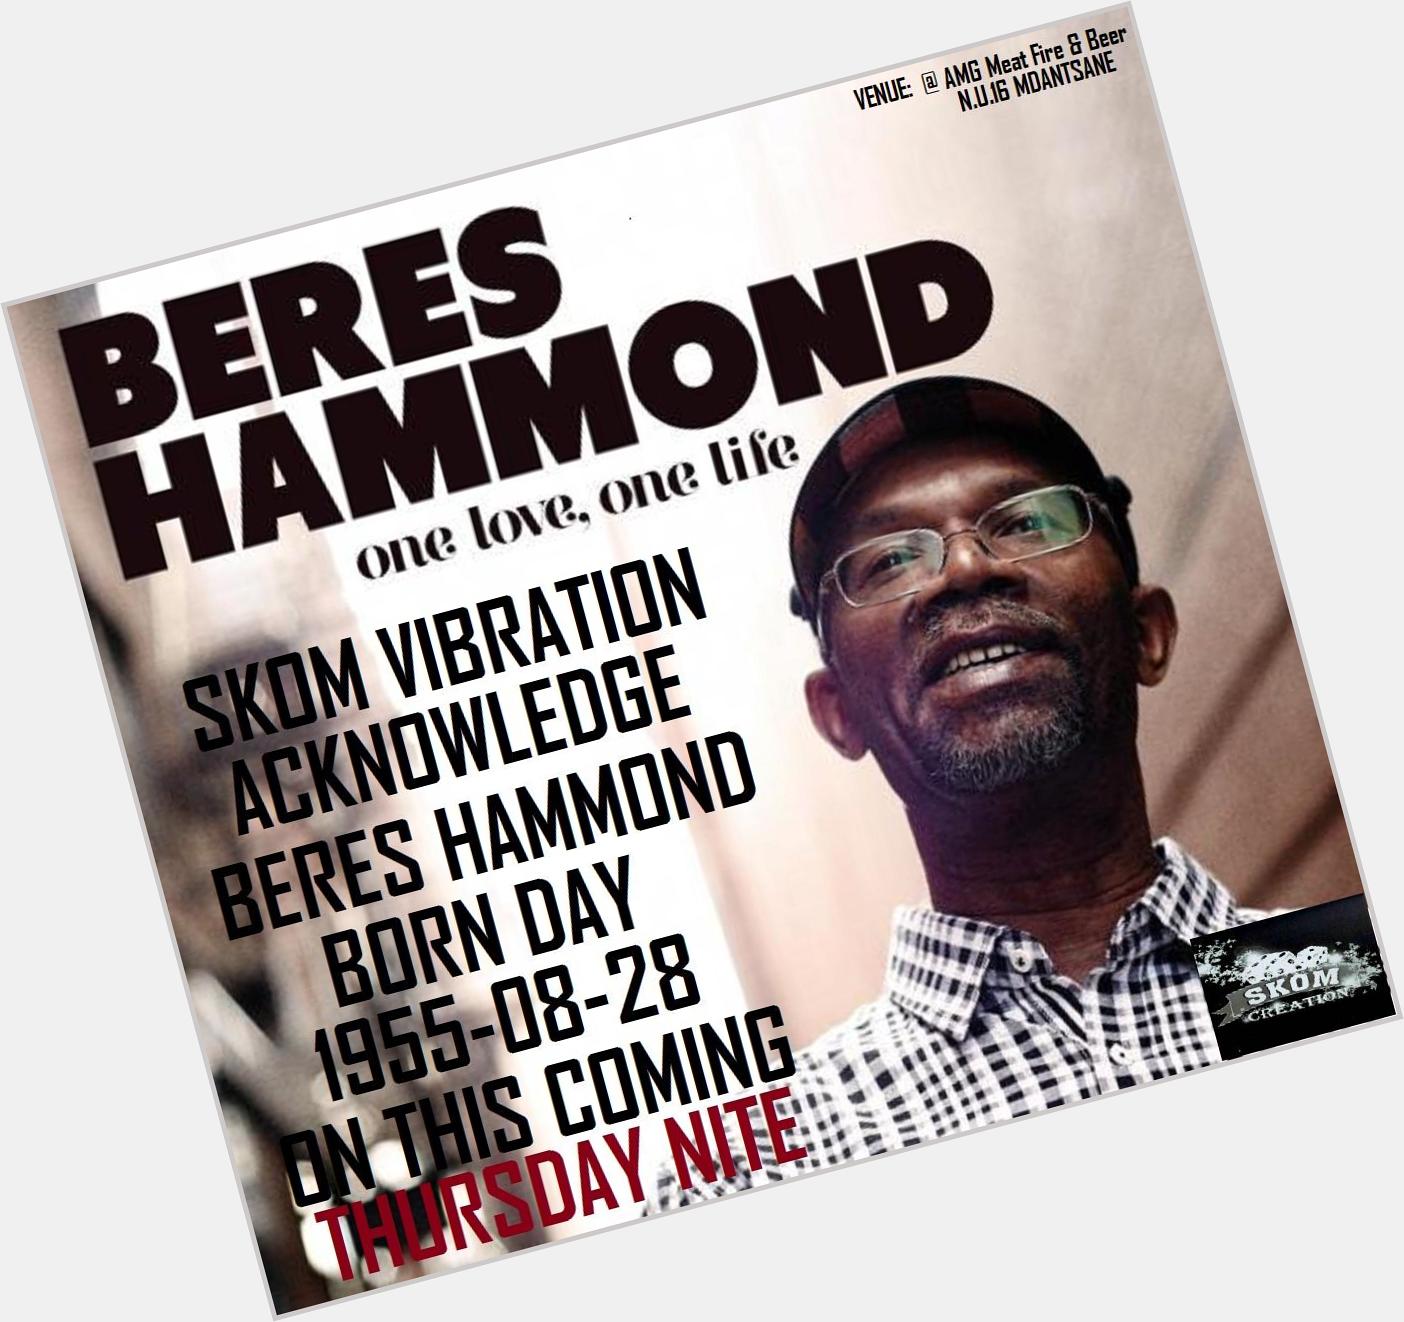 ON THIS COMING THURSDAY SKOM VIBRATION IS ACKNOWLEDGE THE LIVING LEGEND \"BERES HAMMOND\" HAPPY BIRTHDAY ! MAN OF SOil. 